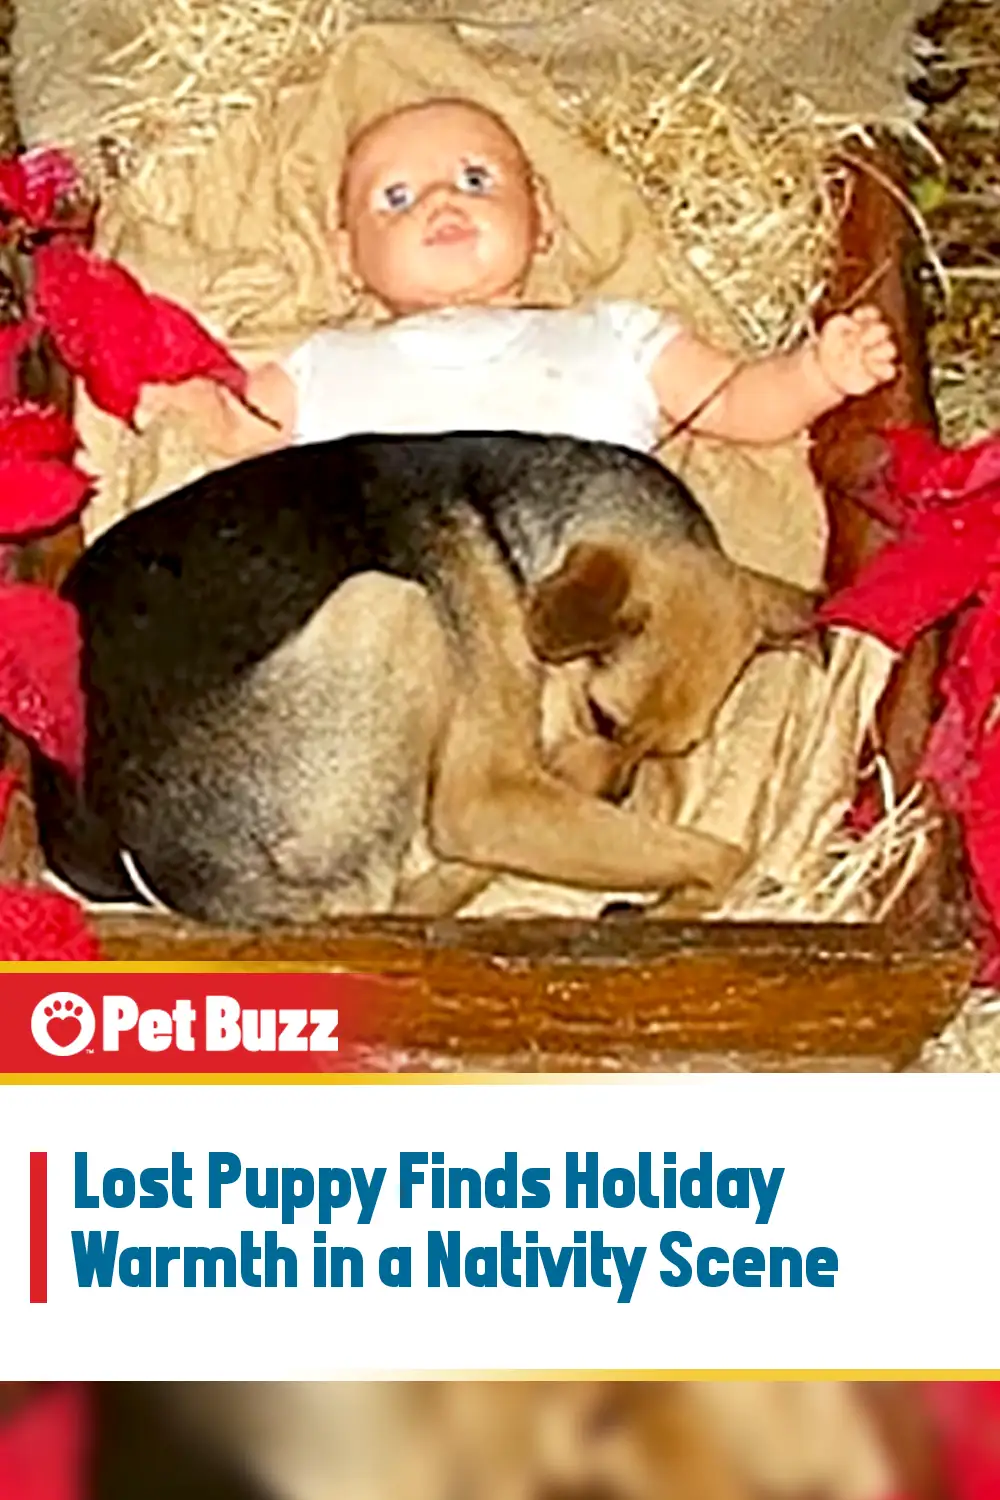 Lost Puppy Finds Holiday Warmth in a Nativity Scene